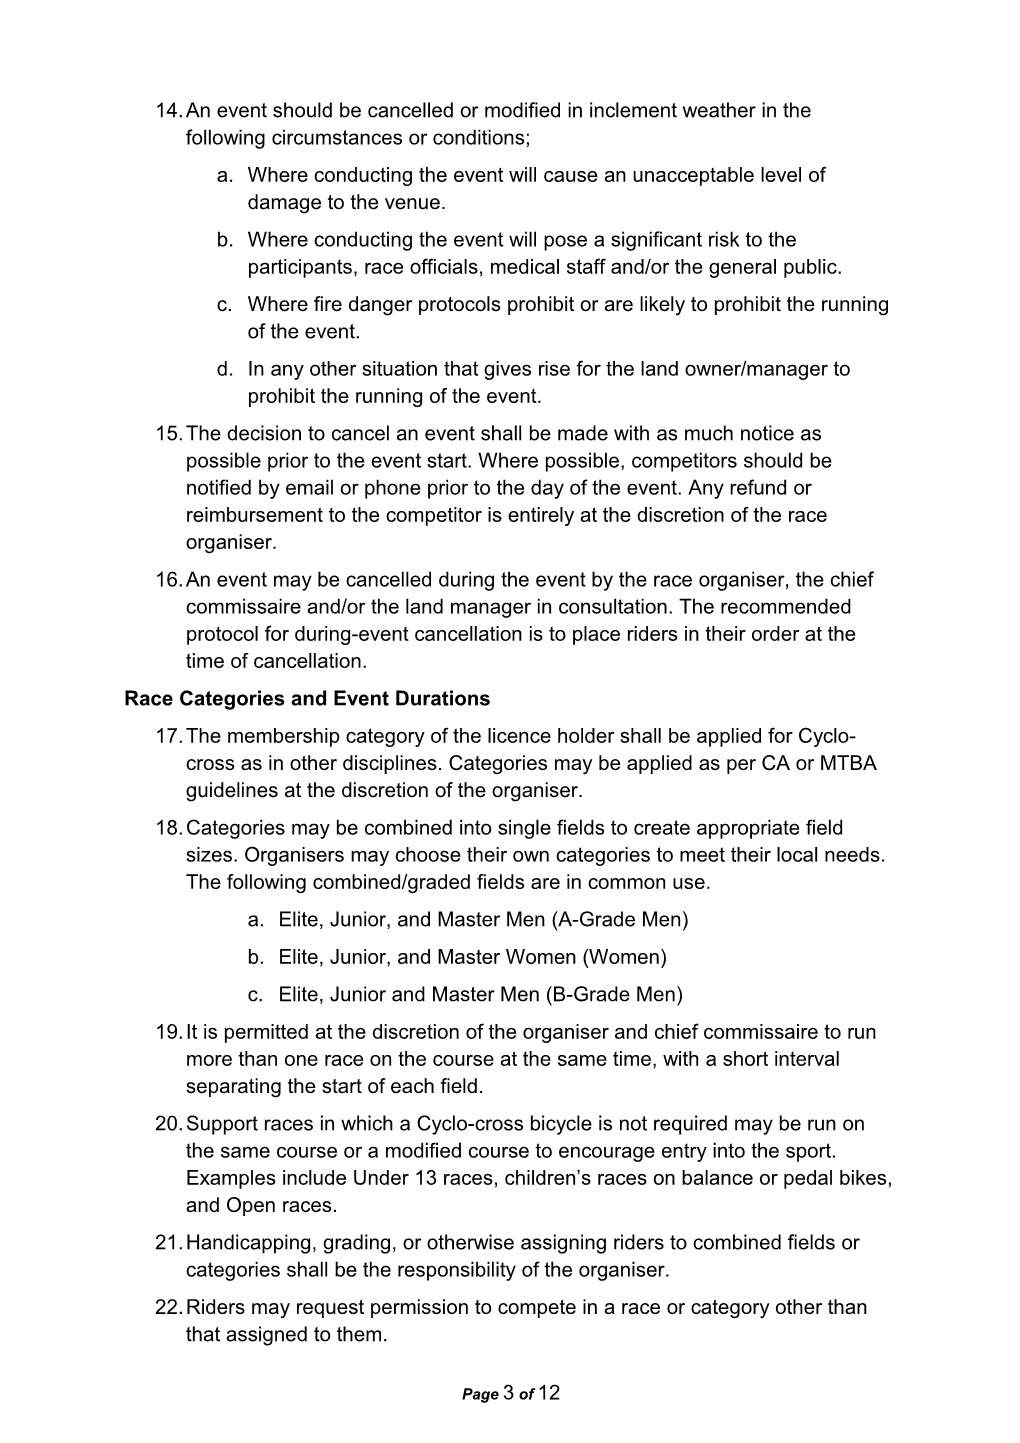 Proposed Technical Regulations for Cyclocross in Australia